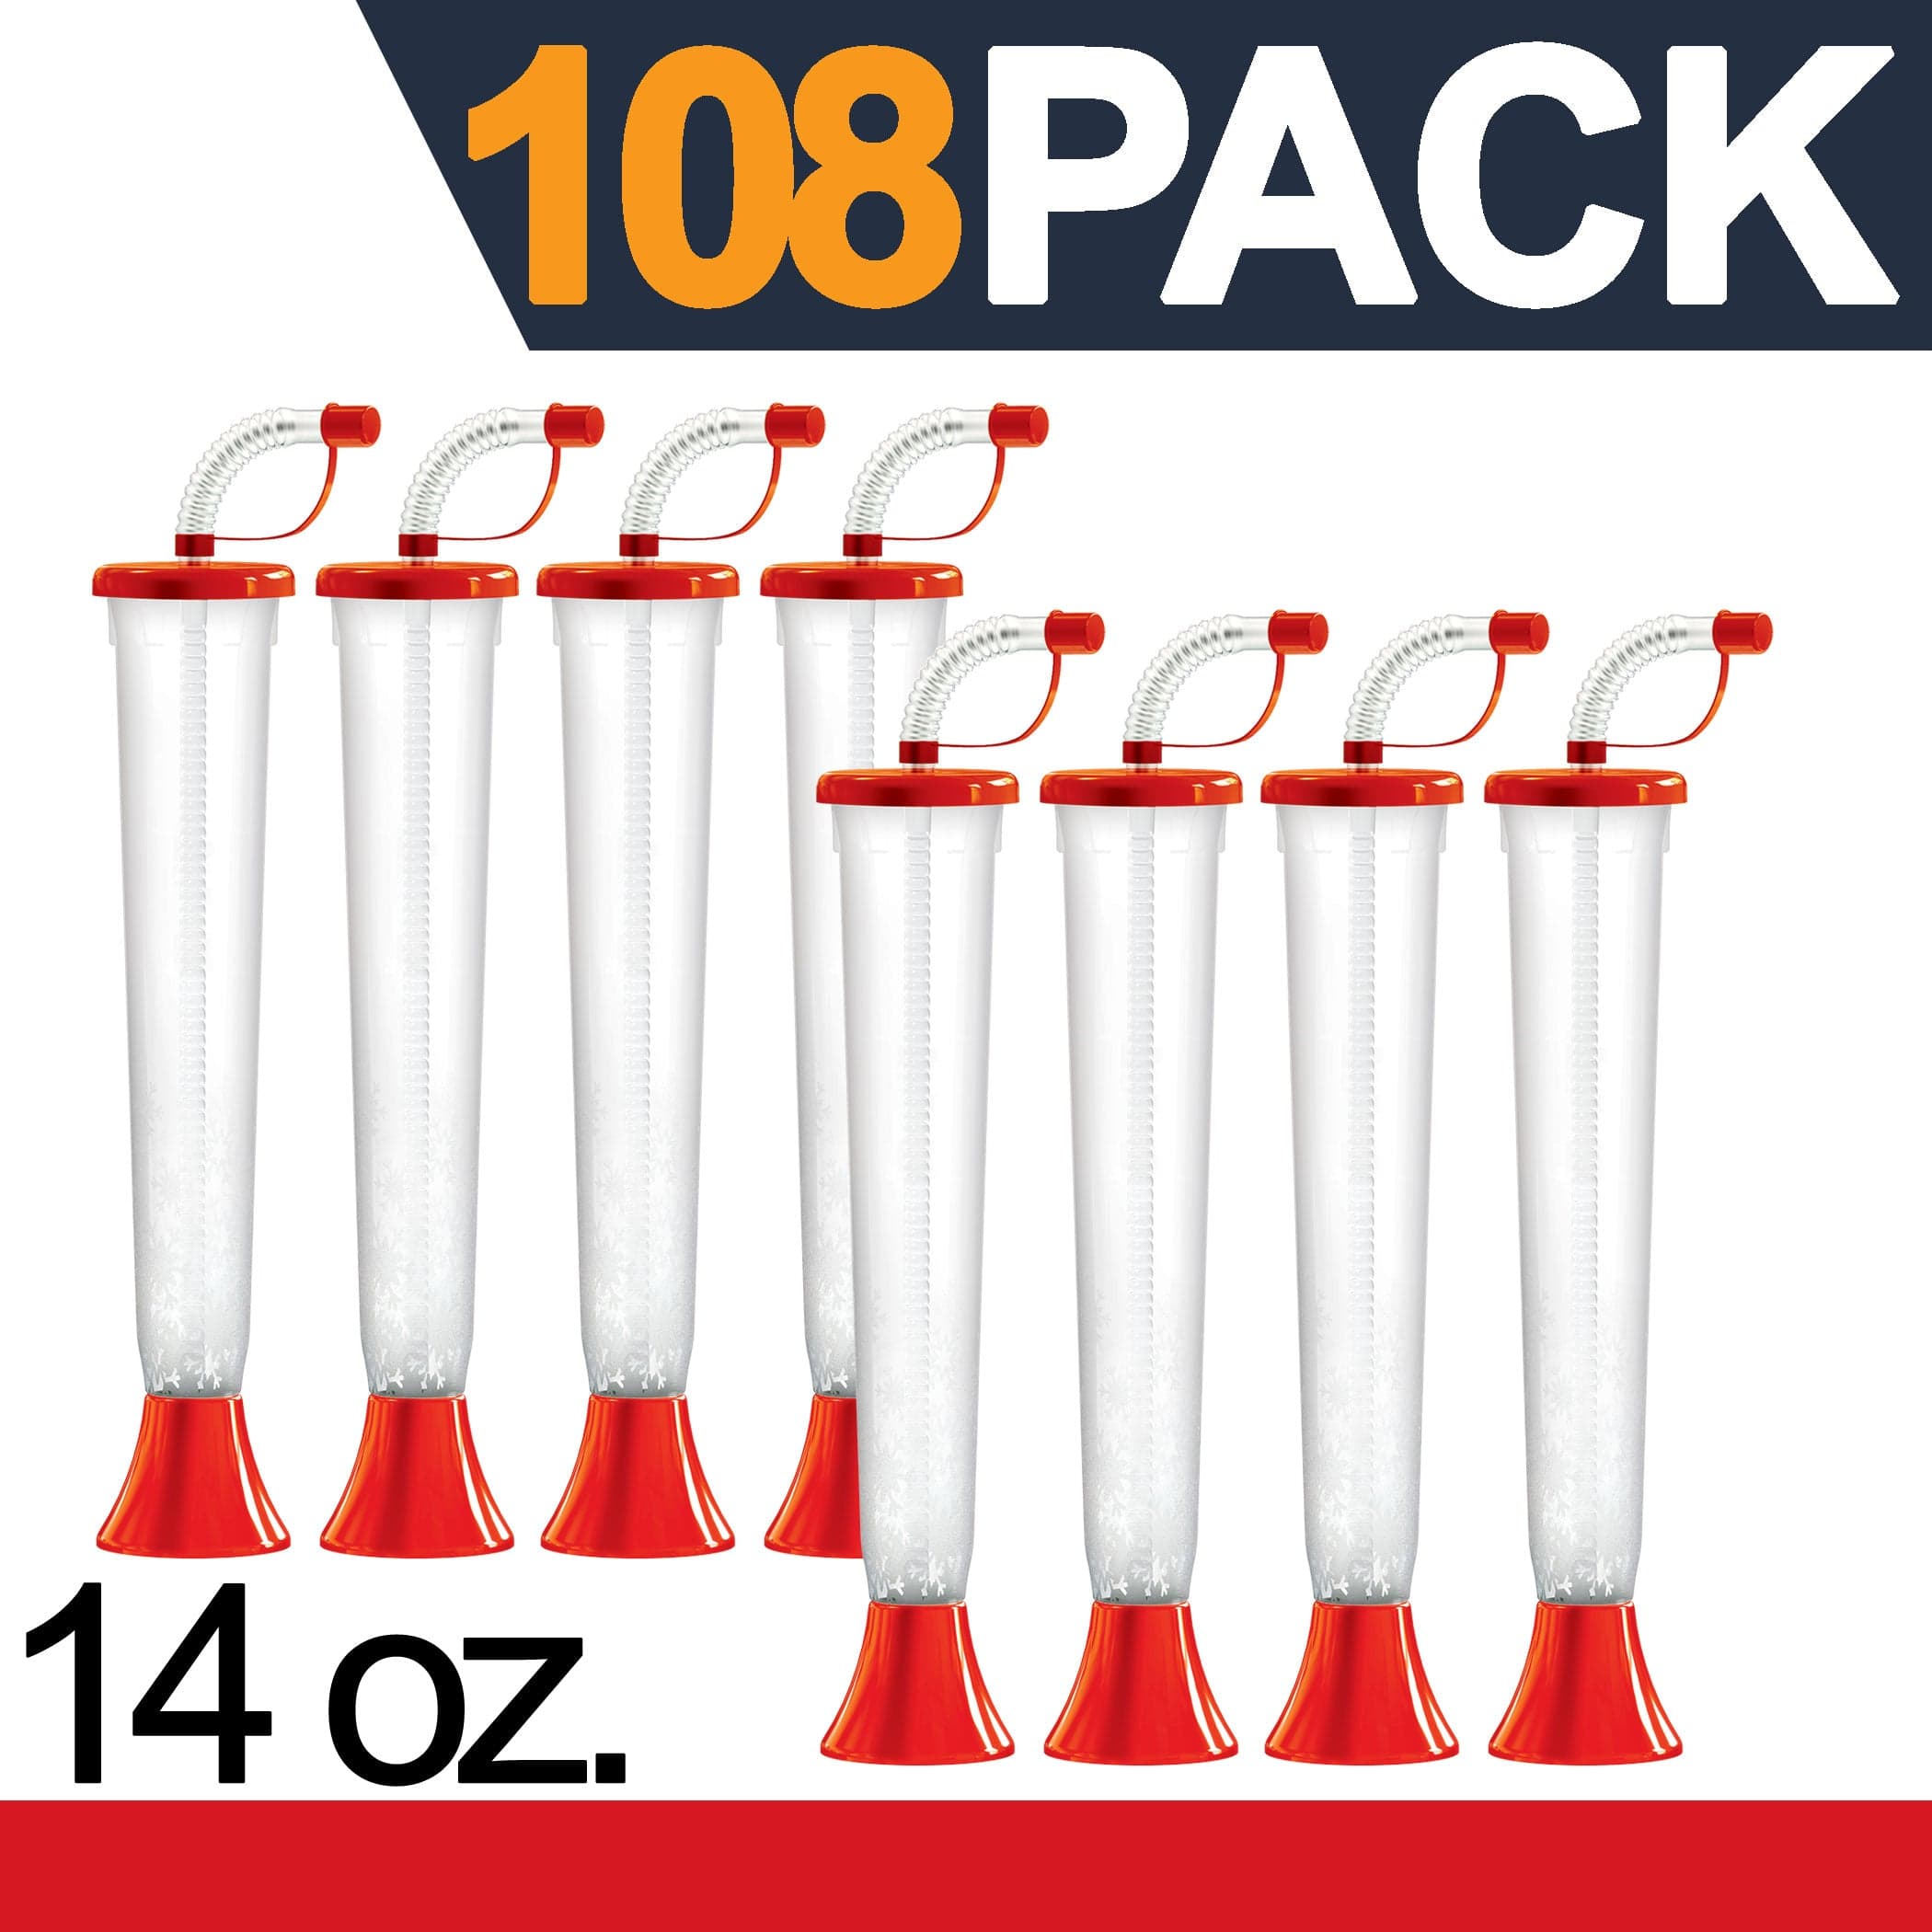 400 PACK] 16 Oz Red Plastic Cups - Red Disposable Plastic Party